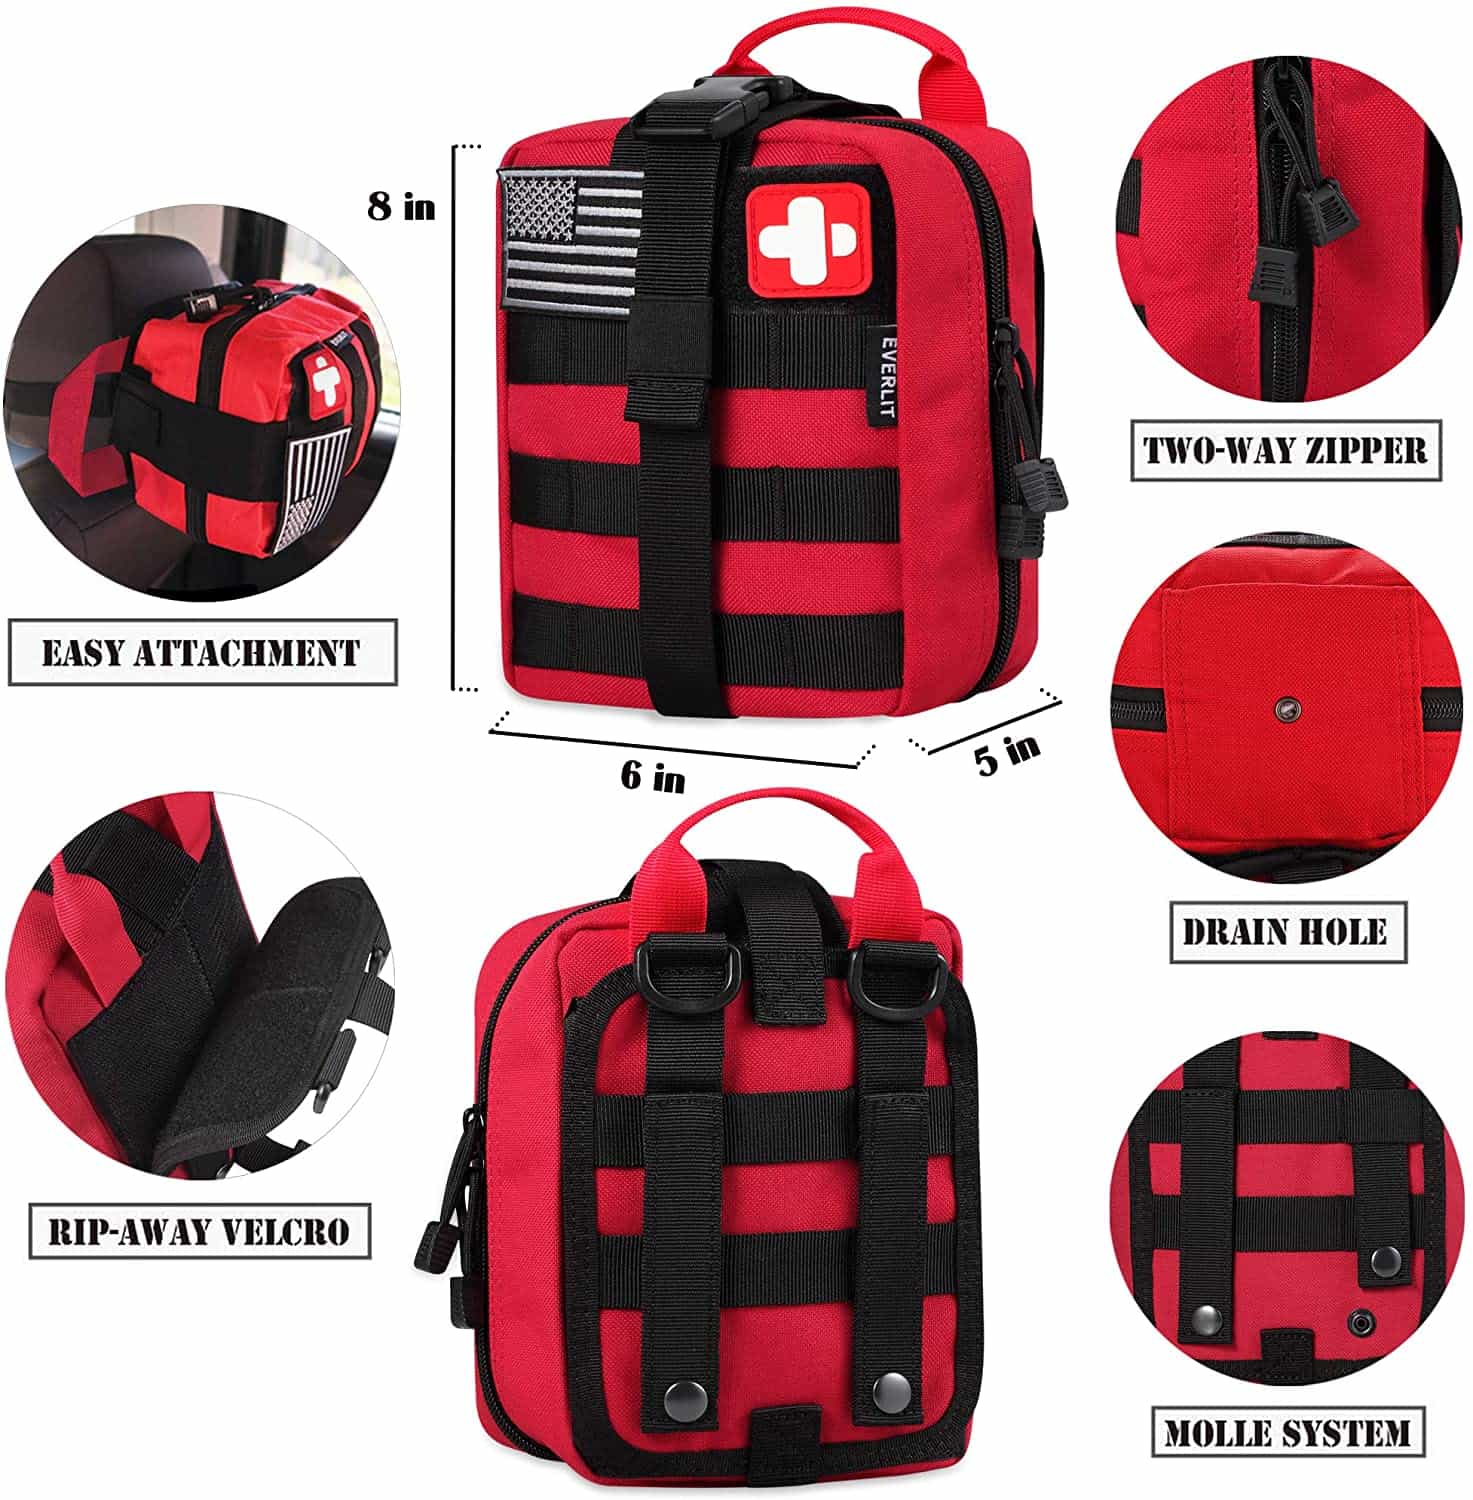 Red Survival First Aid Kit Contains Contains 250 Piece First Aid Kit - 2 